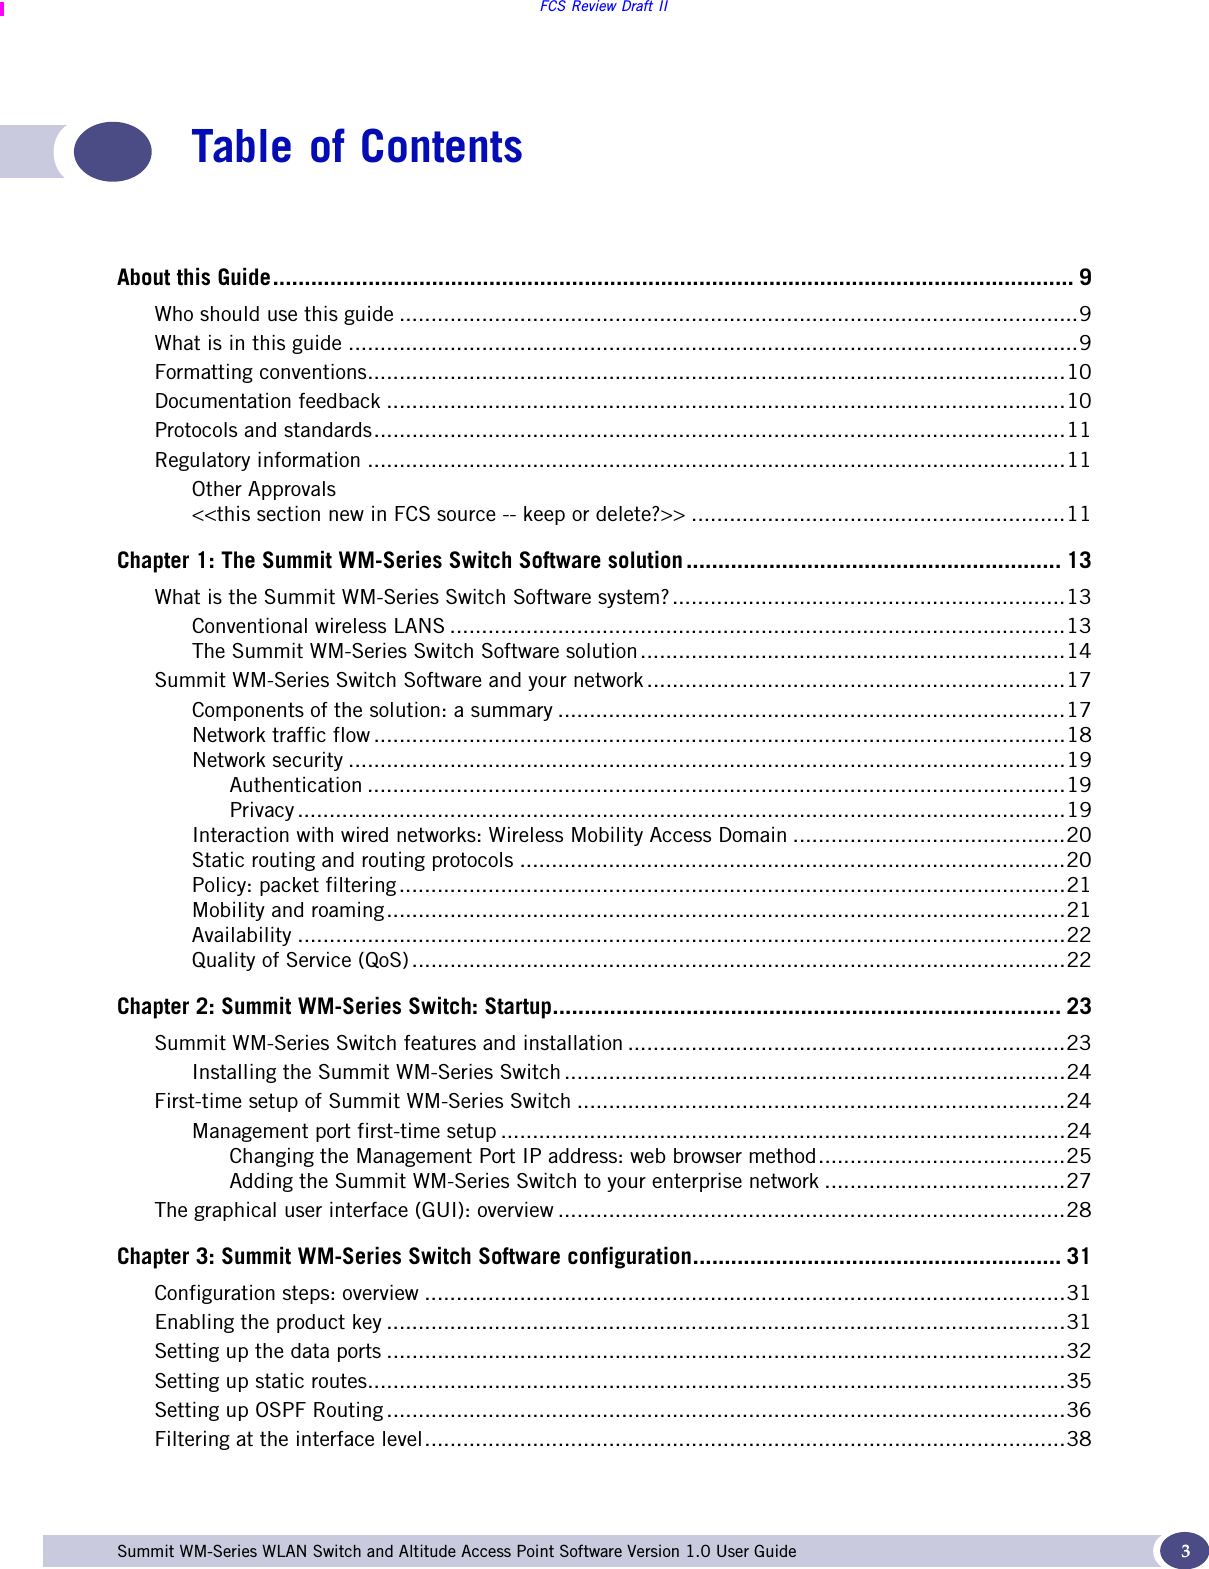 FCS Review Draft IISummit WM-Series WLAN Switch and Altitude Access Point Software Version 1.0 User Guide 3Table of ContentsAbout this Guide.............................................................................................................................. 9Who should use this guide ...........................................................................................................9What is in this guide ...................................................................................................................9Formatting conventions..............................................................................................................10Documentation feedback ...........................................................................................................10Protocols and standards.............................................................................................................11Regulatory information ..............................................................................................................11Other Approvals&lt;&lt;this section new in FCS source -- keep or delete?&gt;&gt; ...........................................................11Chapter 1: The Summit WM-Series Switch Software solution ........................................................... 13What is the Summit WM-Series Switch Software system?..............................................................13Conventional wireless LANS .................................................................................................13The Summit WM-Series Switch Software solution...................................................................14Summit WM-Series Switch Software and your network ..................................................................17Components of the solution: a summary ................................................................................17Network traffic flow .............................................................................................................18Network security .................................................................................................................19Authentication ..............................................................................................................19Privacy .........................................................................................................................19Interaction with wired networks: Wireless Mobility Access Domain ...........................................20Static routing and routing protocols ......................................................................................20Policy: packet filtering .........................................................................................................21Mobility and roaming...........................................................................................................21Availability .........................................................................................................................22Quality of Service (QoS) .......................................................................................................22Chapter 2: Summit WM-Series Switch: Startup................................................................................ 23Summit WM-Series Switch features and installation .....................................................................23Installing the Summit WM-Series Switch ...............................................................................24First-time setup of Summit WM-Series Switch .............................................................................24Management port first-time setup .........................................................................................24Changing the Management Port IP address: web browser method.......................................25Adding the Summit WM-Series Switch to your enterprise network ......................................27The graphical user interface (GUI): overview ................................................................................28Chapter 3: Summit WM-Series Switch Software configuration.......................................................... 31Configuration steps: overview .....................................................................................................31Enabling the product key ...........................................................................................................31Setting up the data ports ...........................................................................................................32Setting up static routes..............................................................................................................35Setting up OSPF Routing ...........................................................................................................36Filtering at the interface level.....................................................................................................38